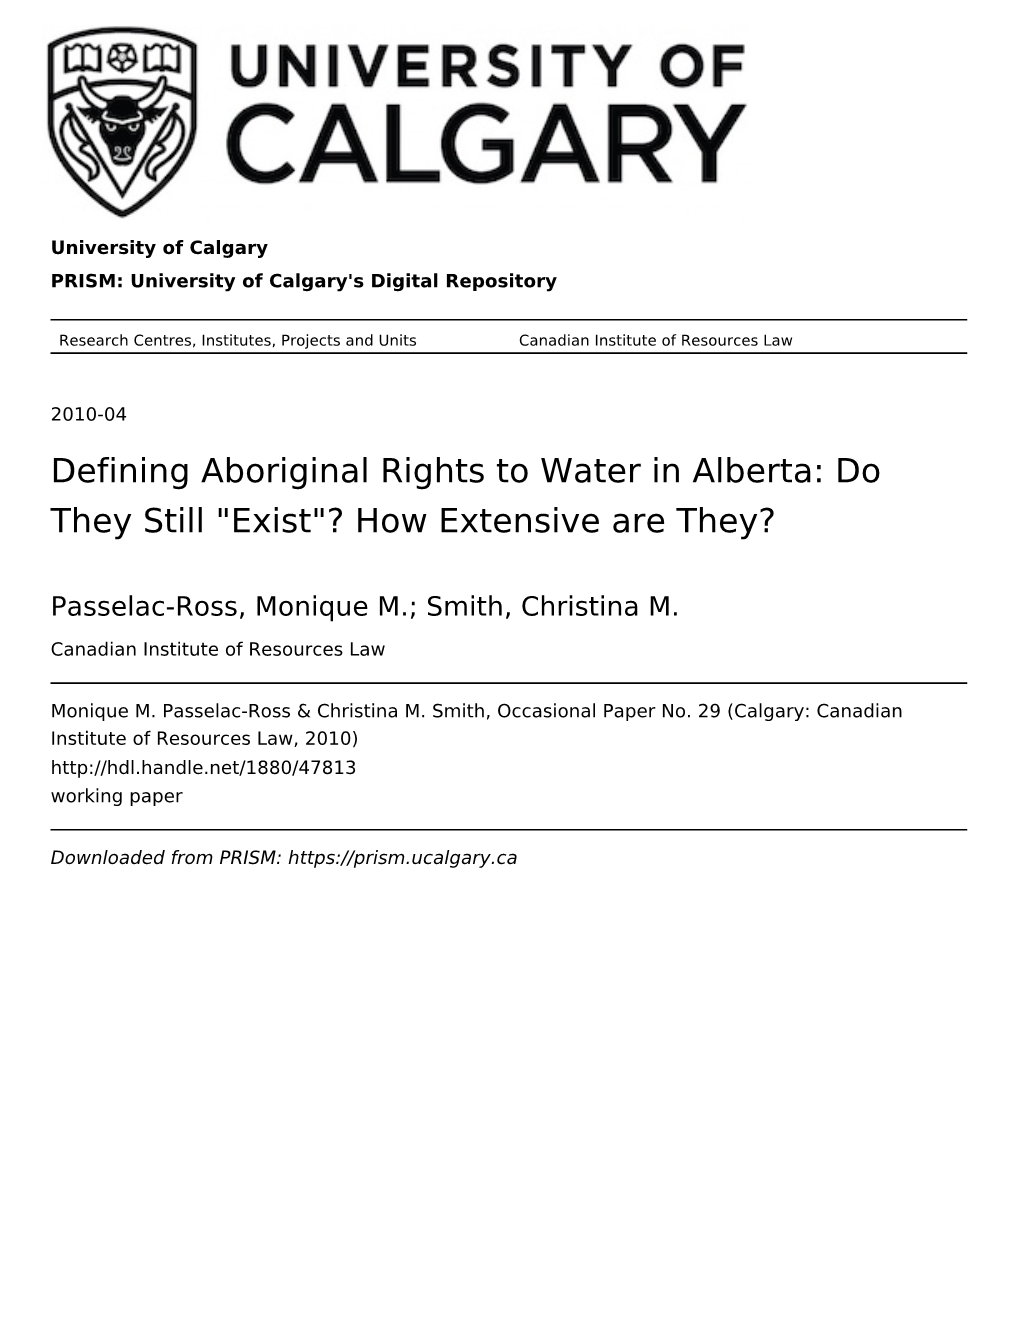 Defining Aboriginal Rights to Water in Alberta: Do They Still "Exist"? How Extensive Are They?